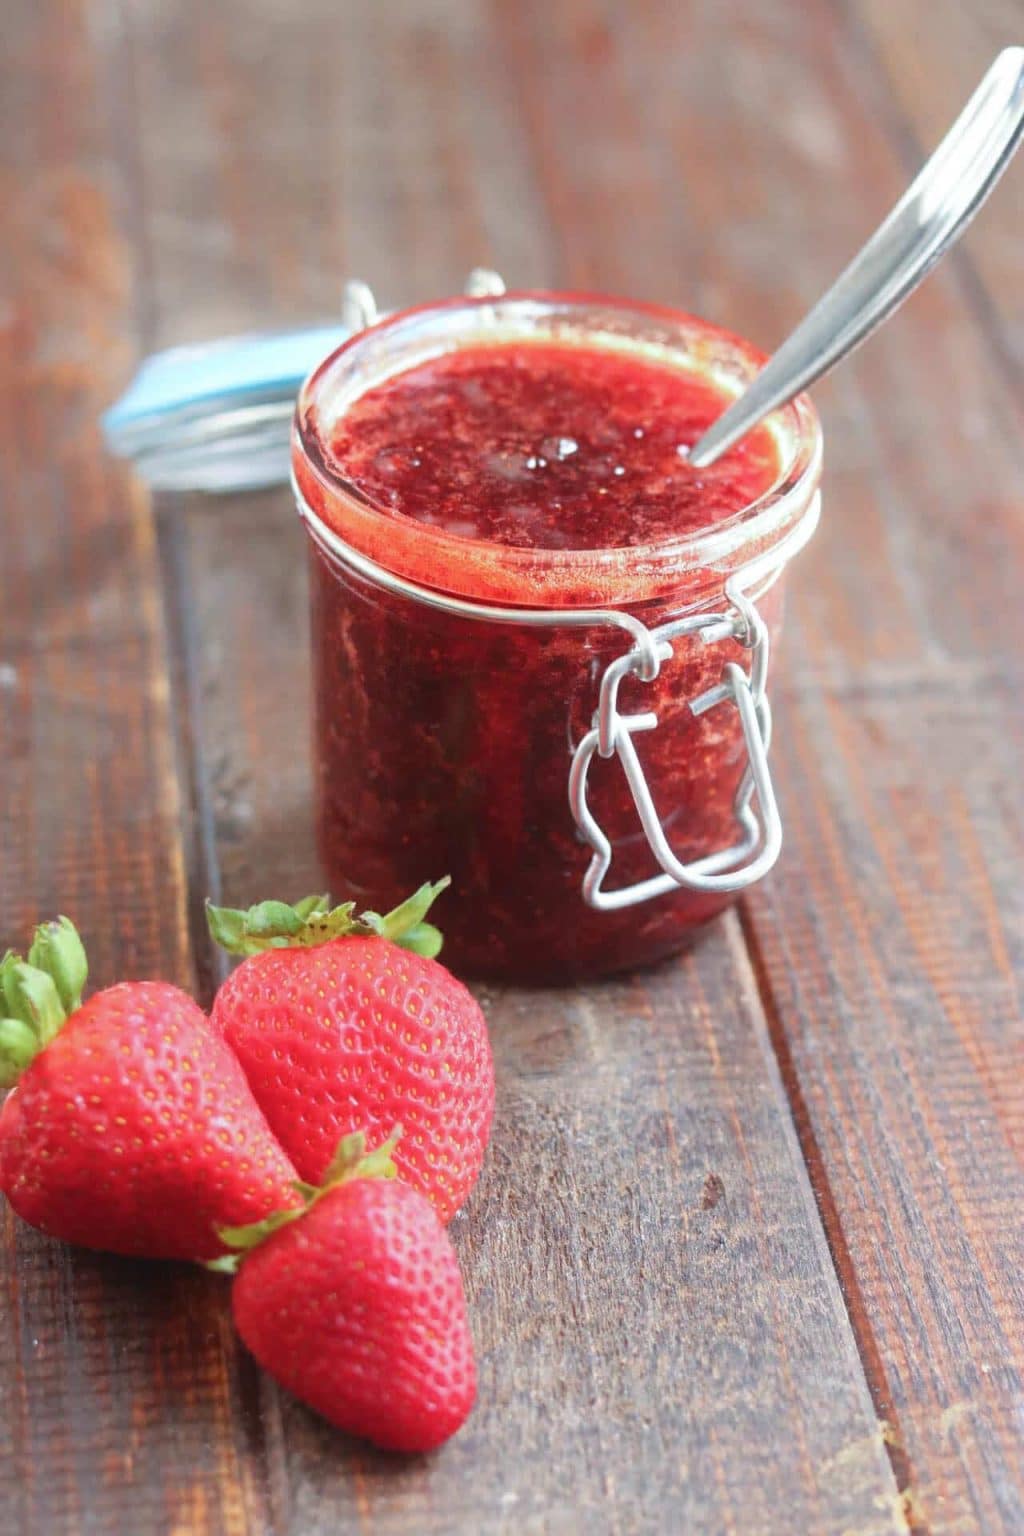 jar of strawberry jam with a spoon in it with strawberries alongside it